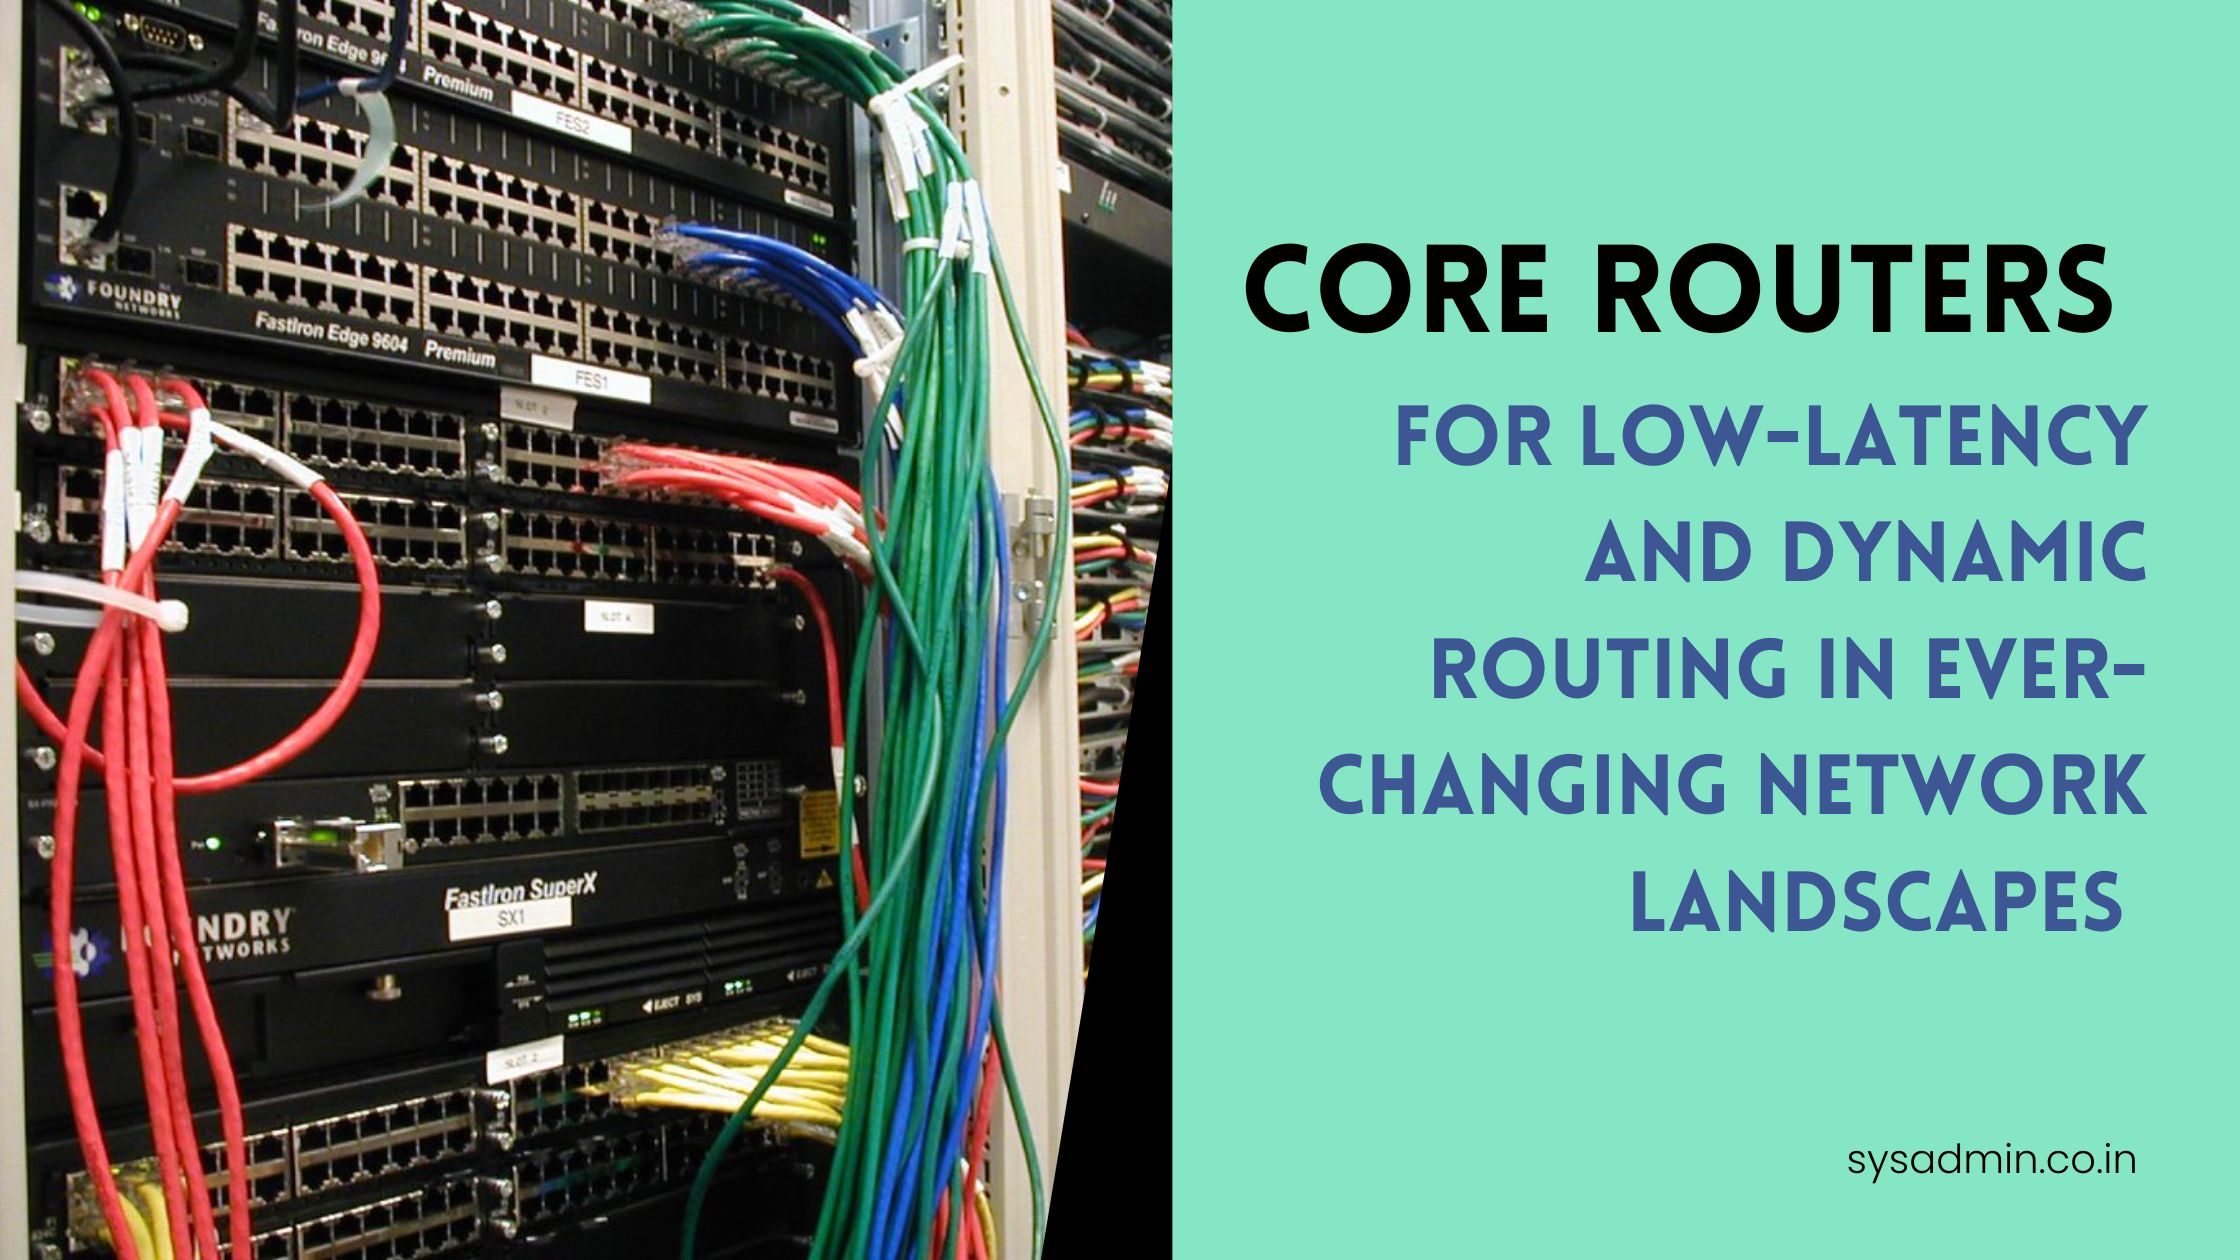 for Low-Latency and Dynamic Routing in Ever-Changing Network Landscapes